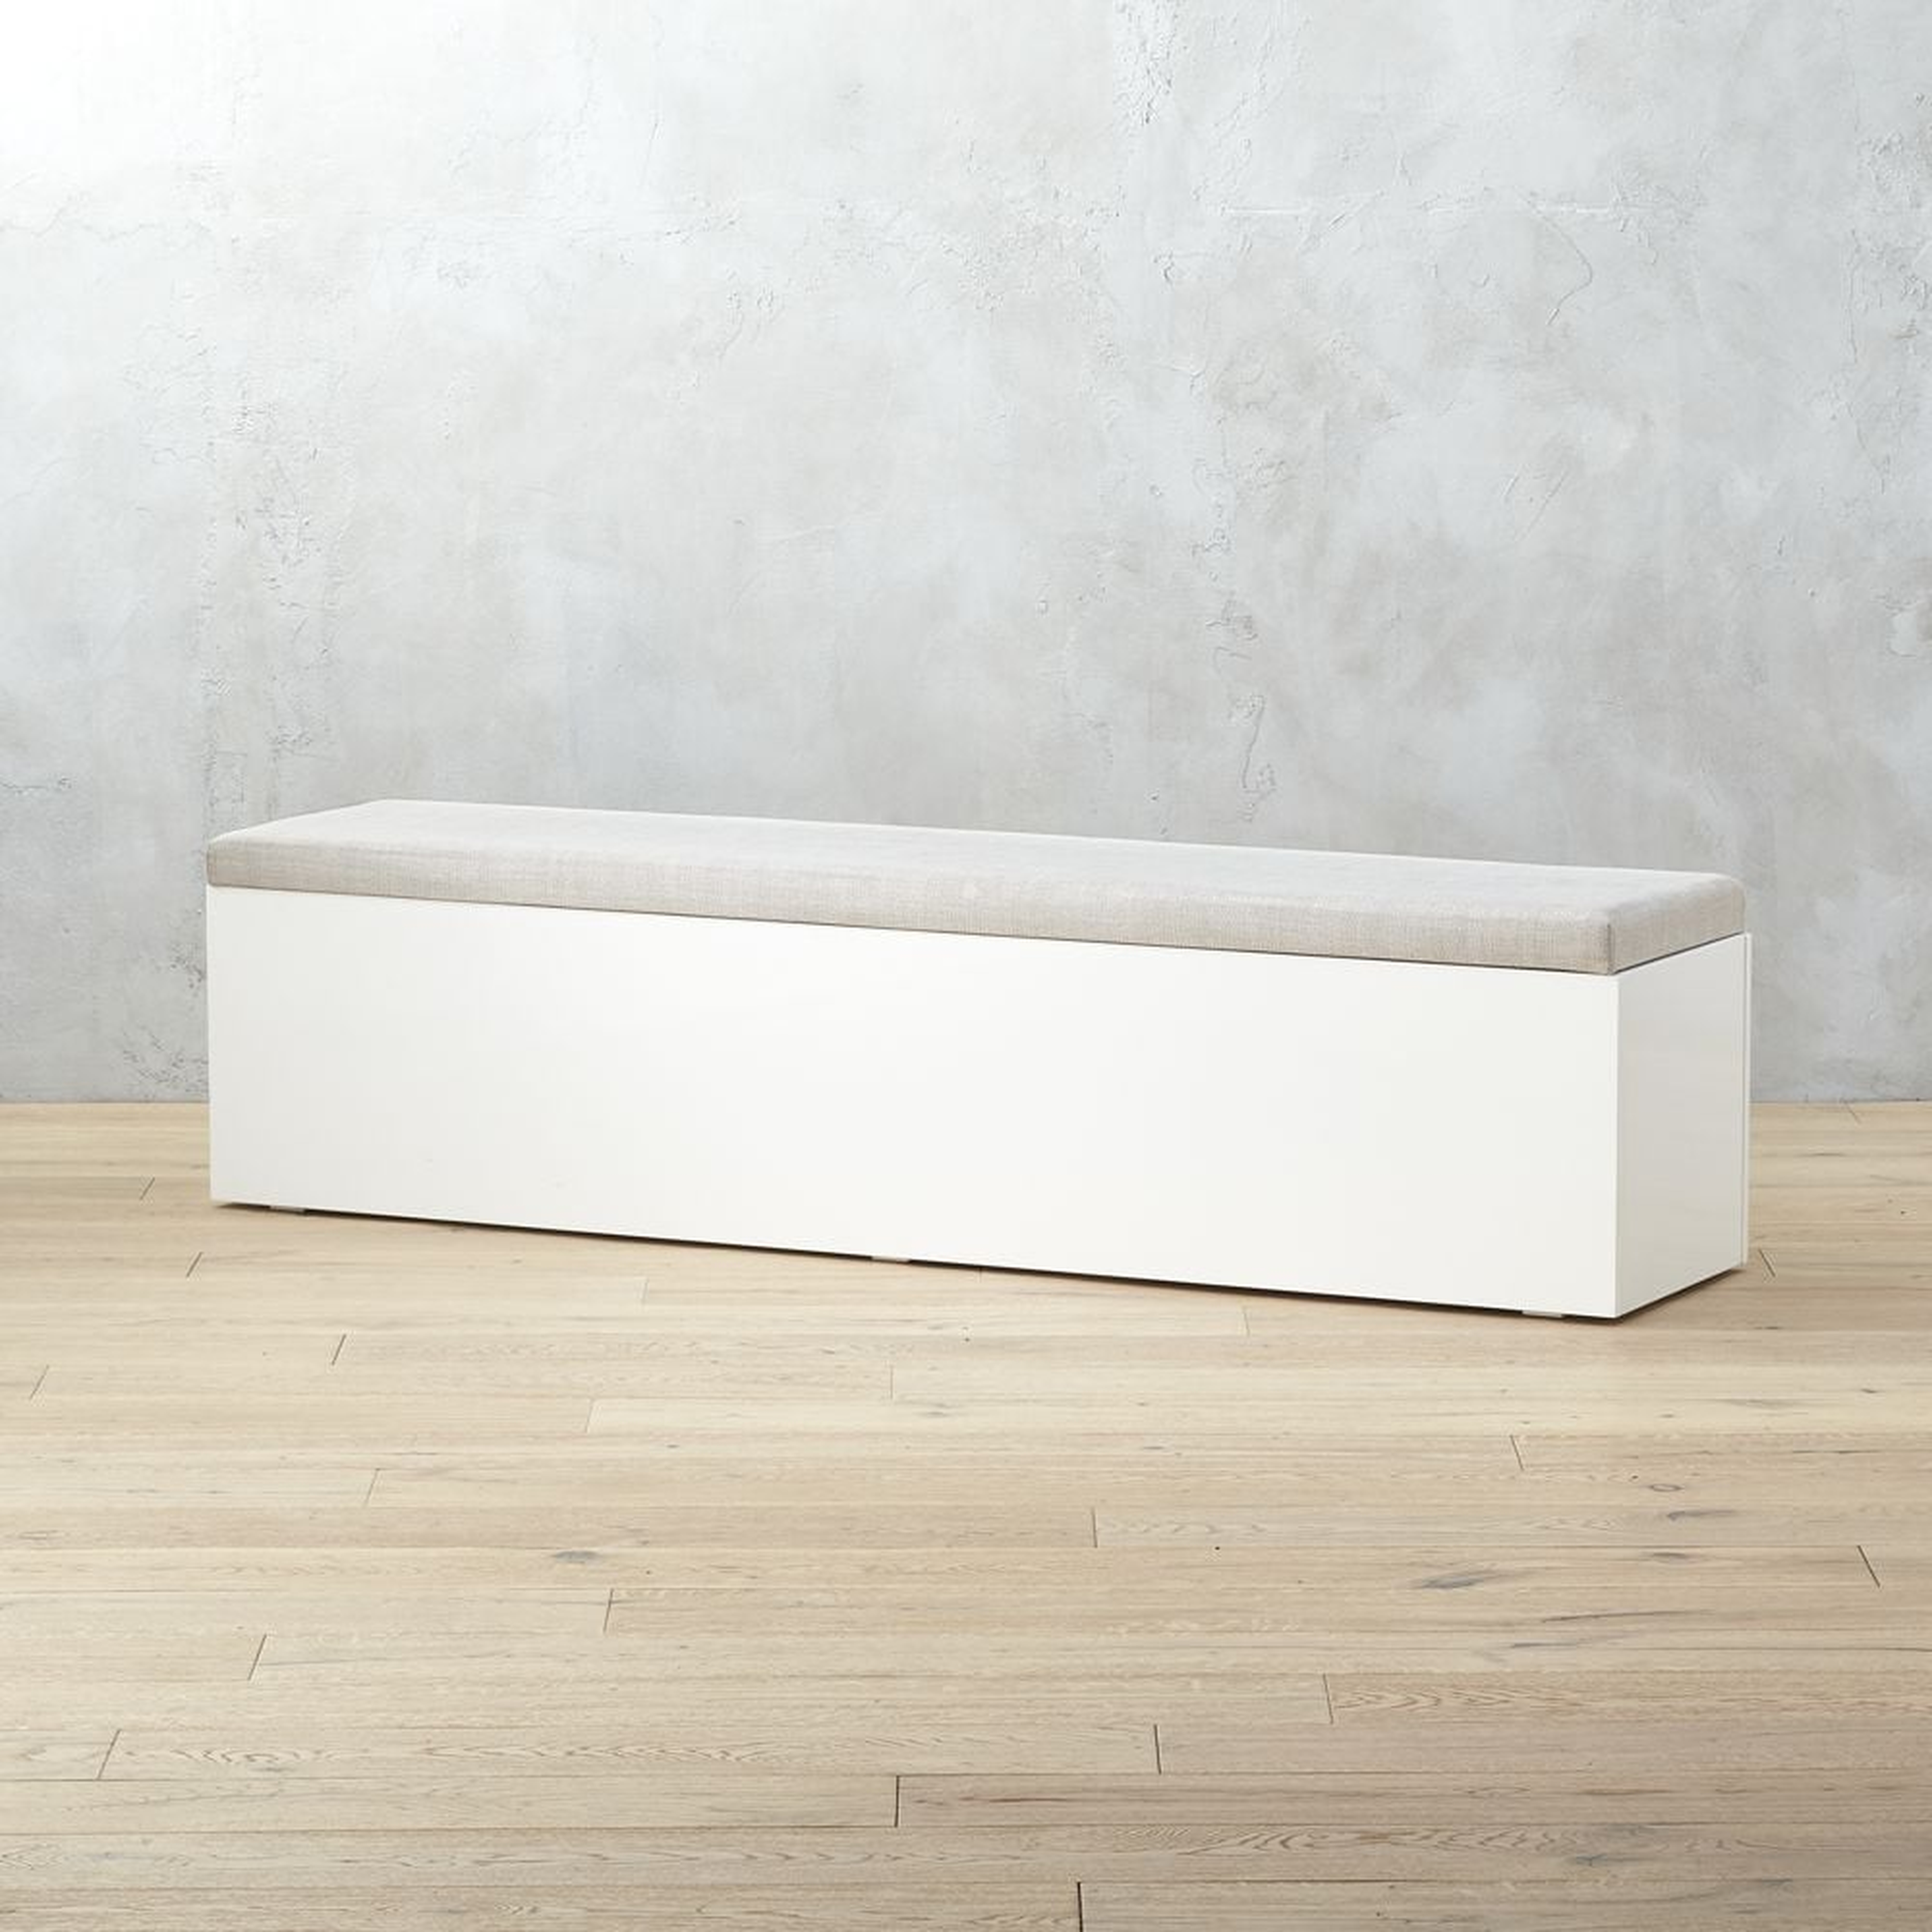 Catch-All Large White Storage Bench - CB2